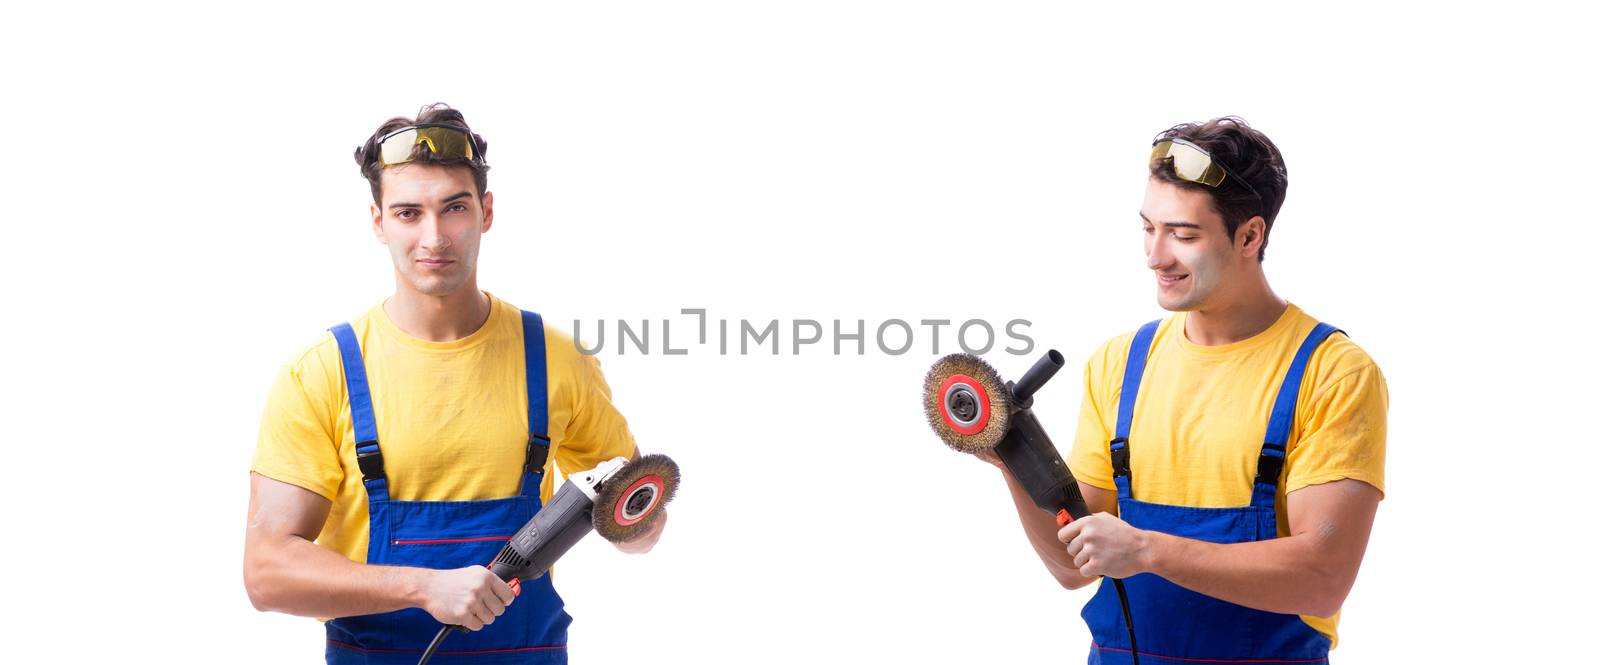 Contractor employee with sander isolated on white background